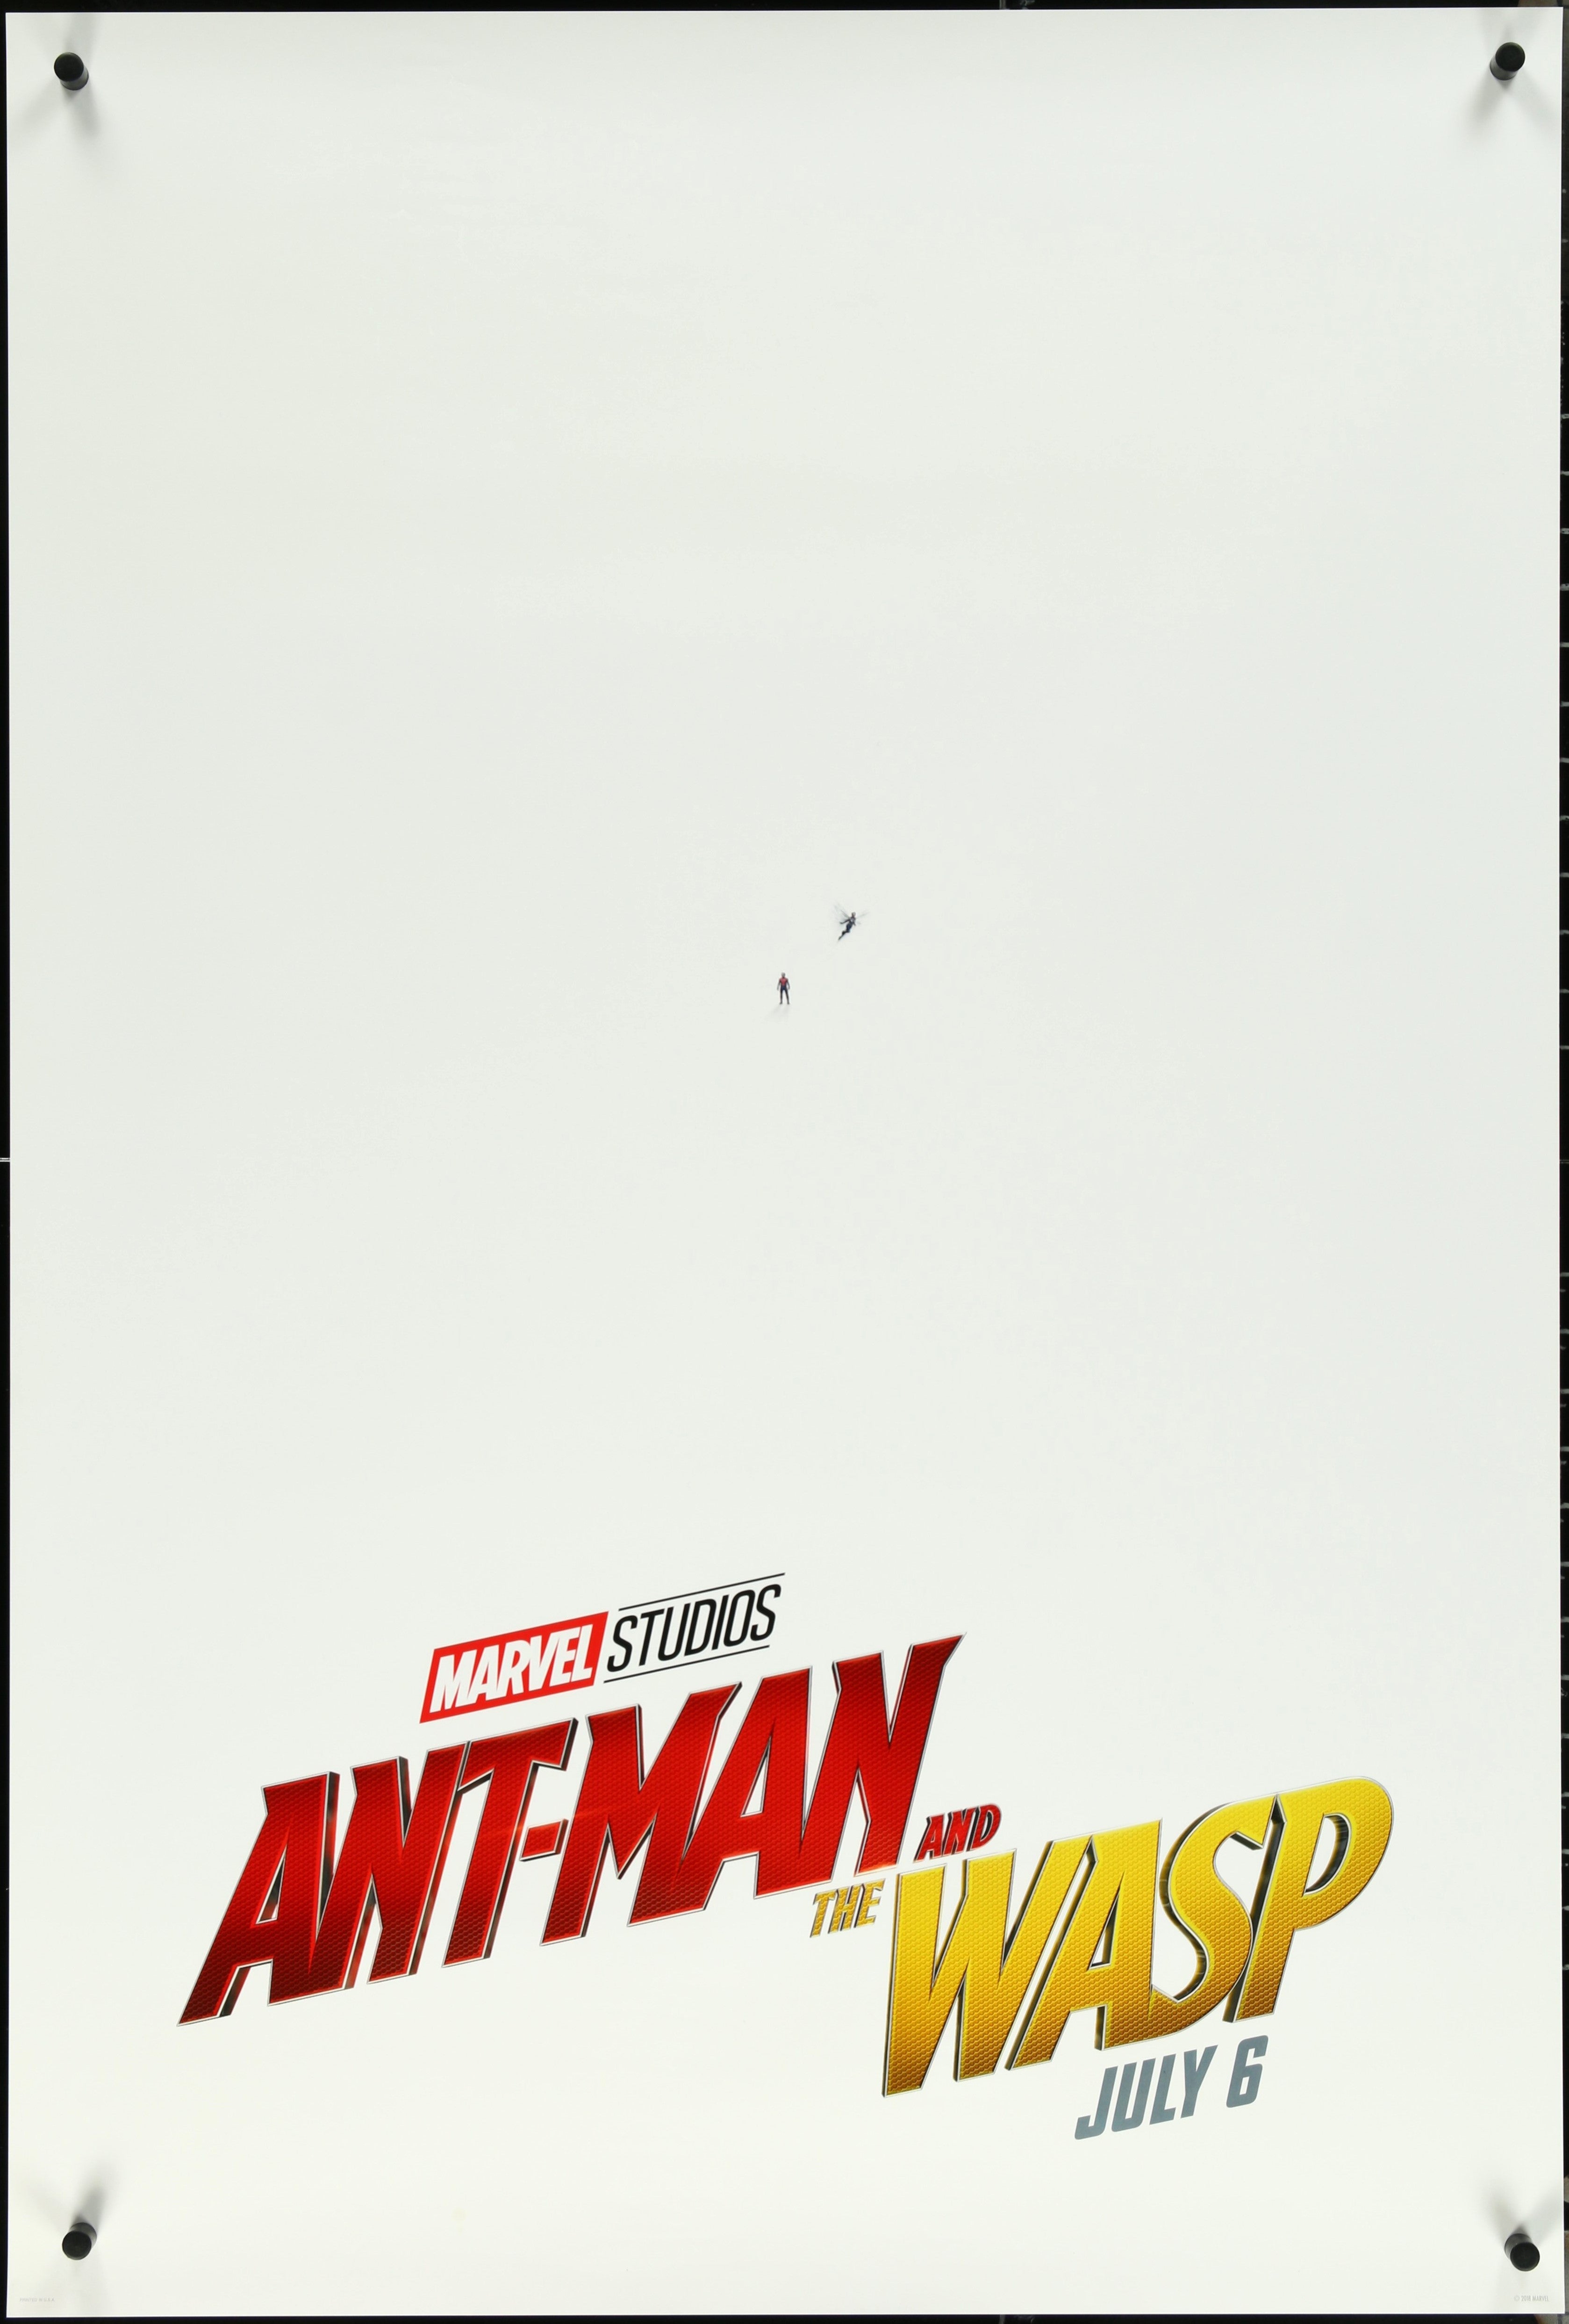 ANT-MAN & THE WASP (2018)